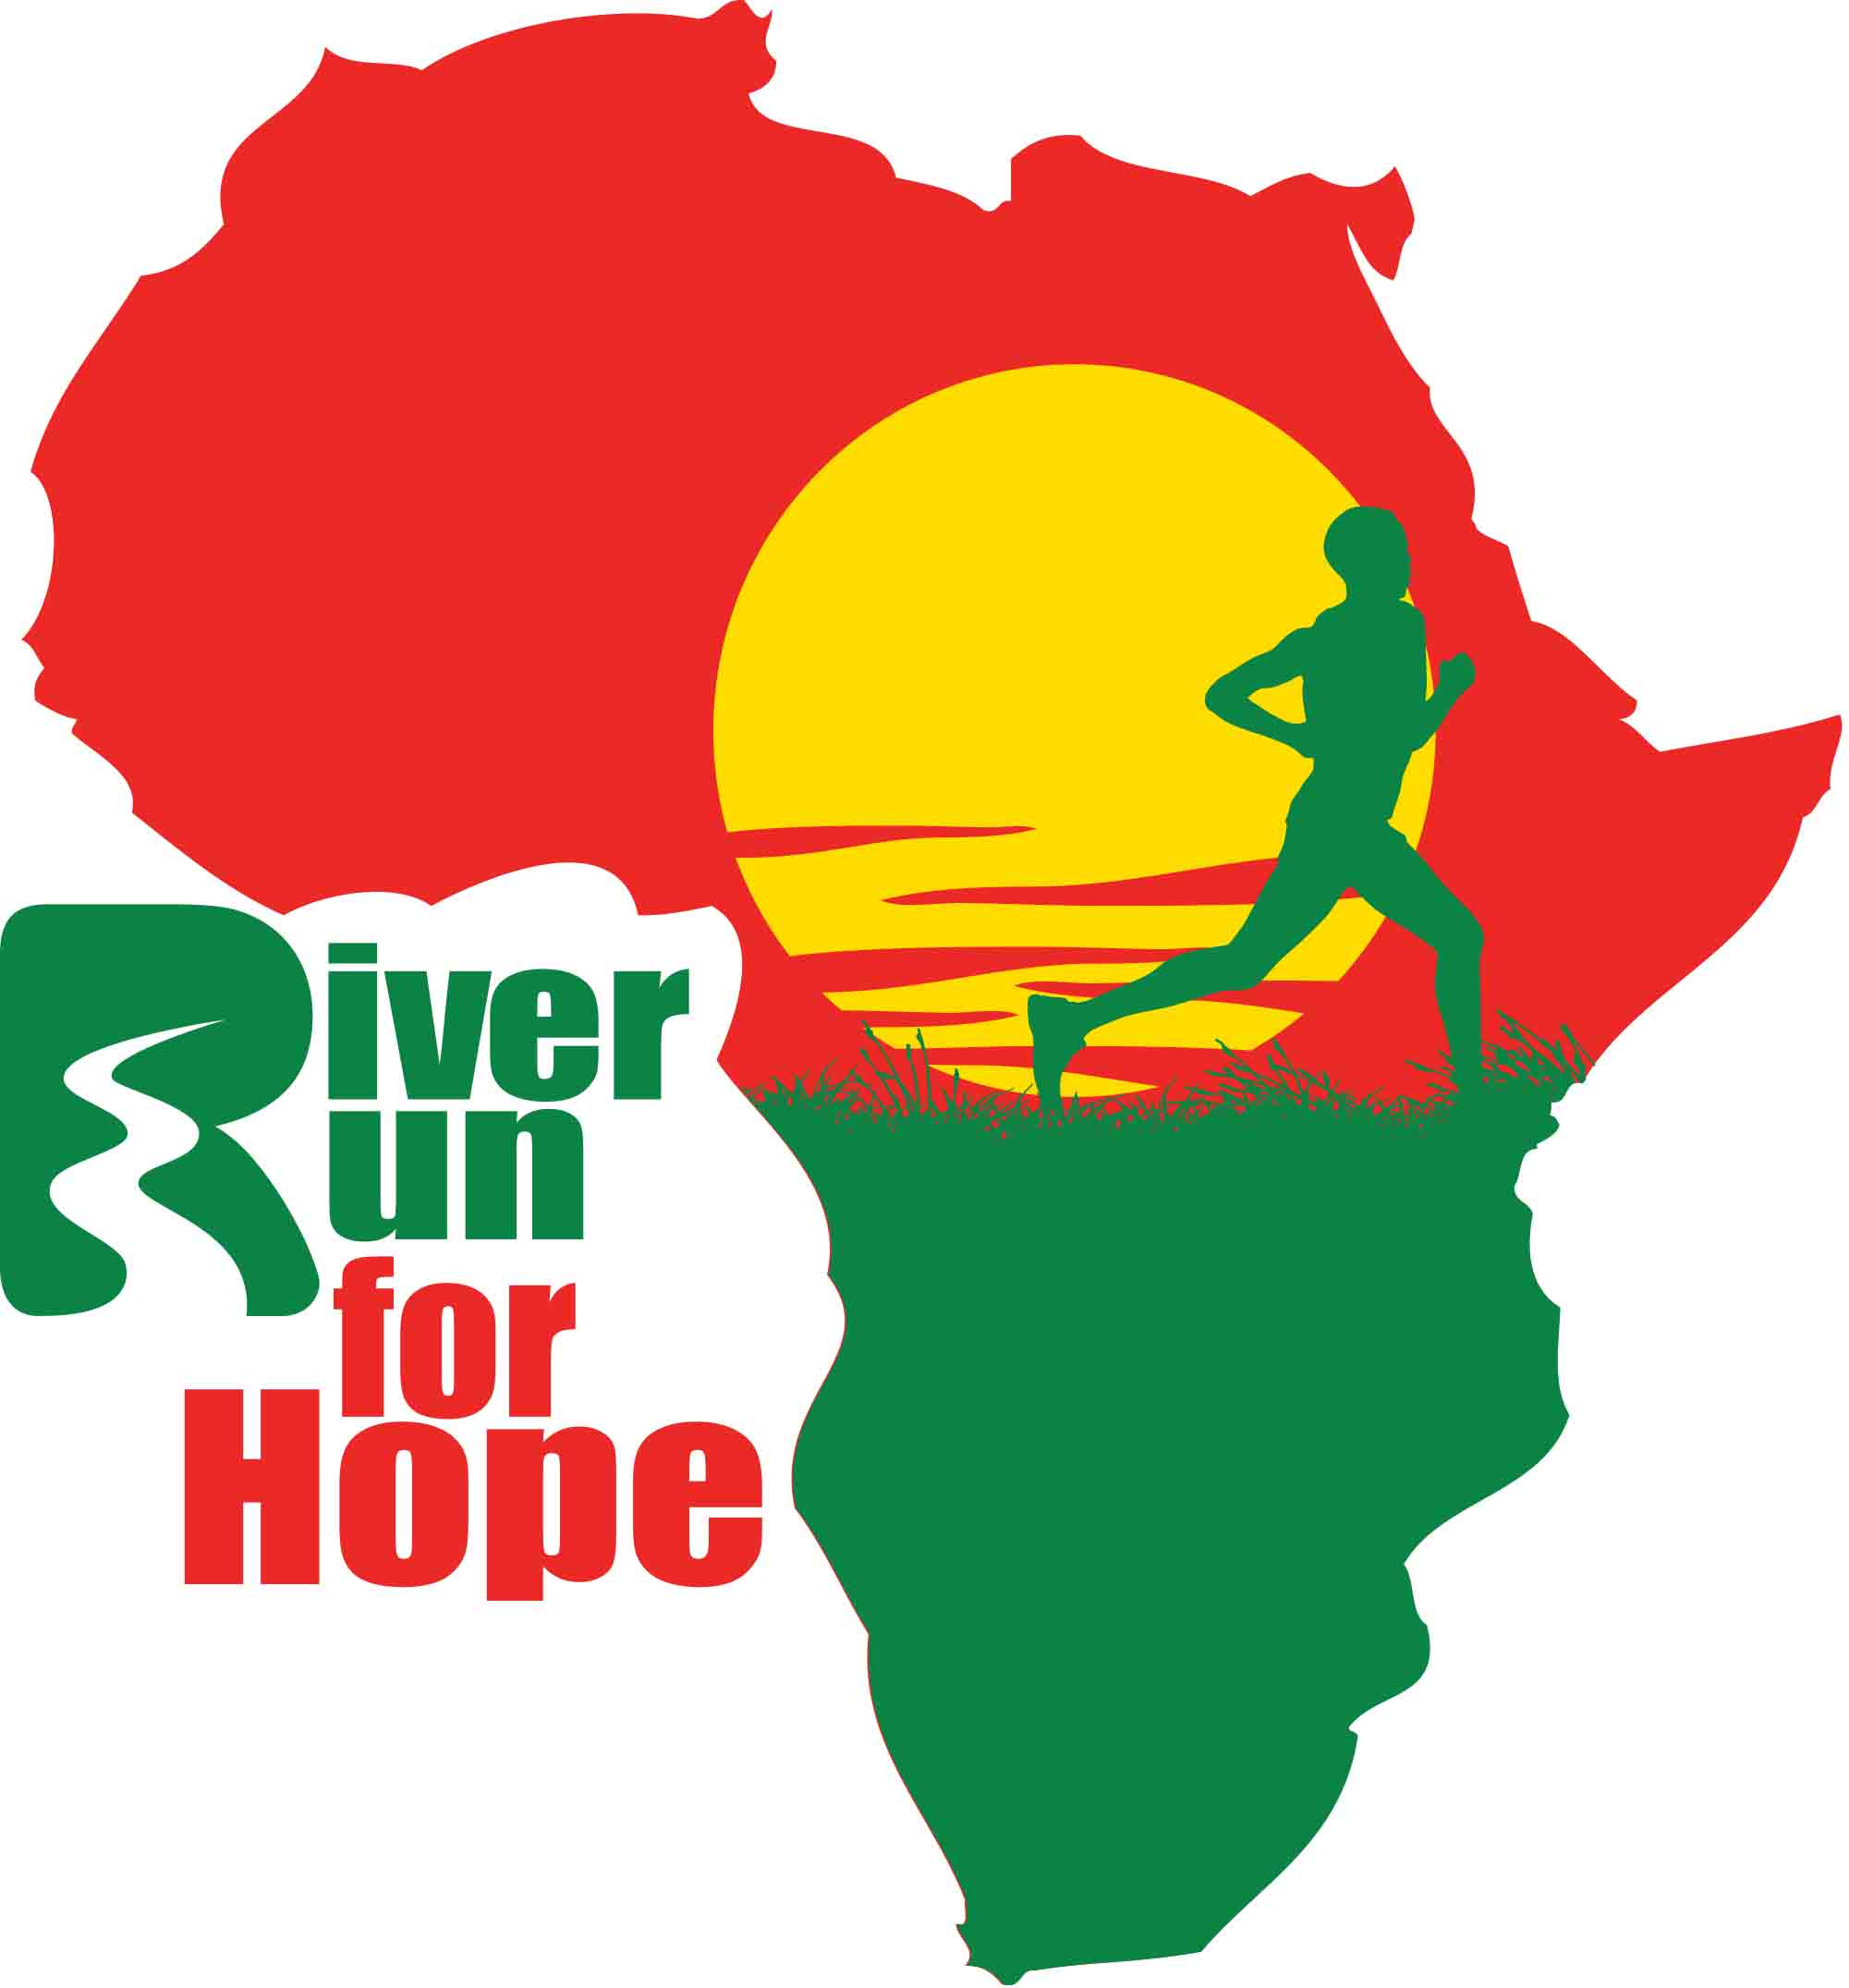 11th Annual River Run for Hope - Roswell, GA 2020